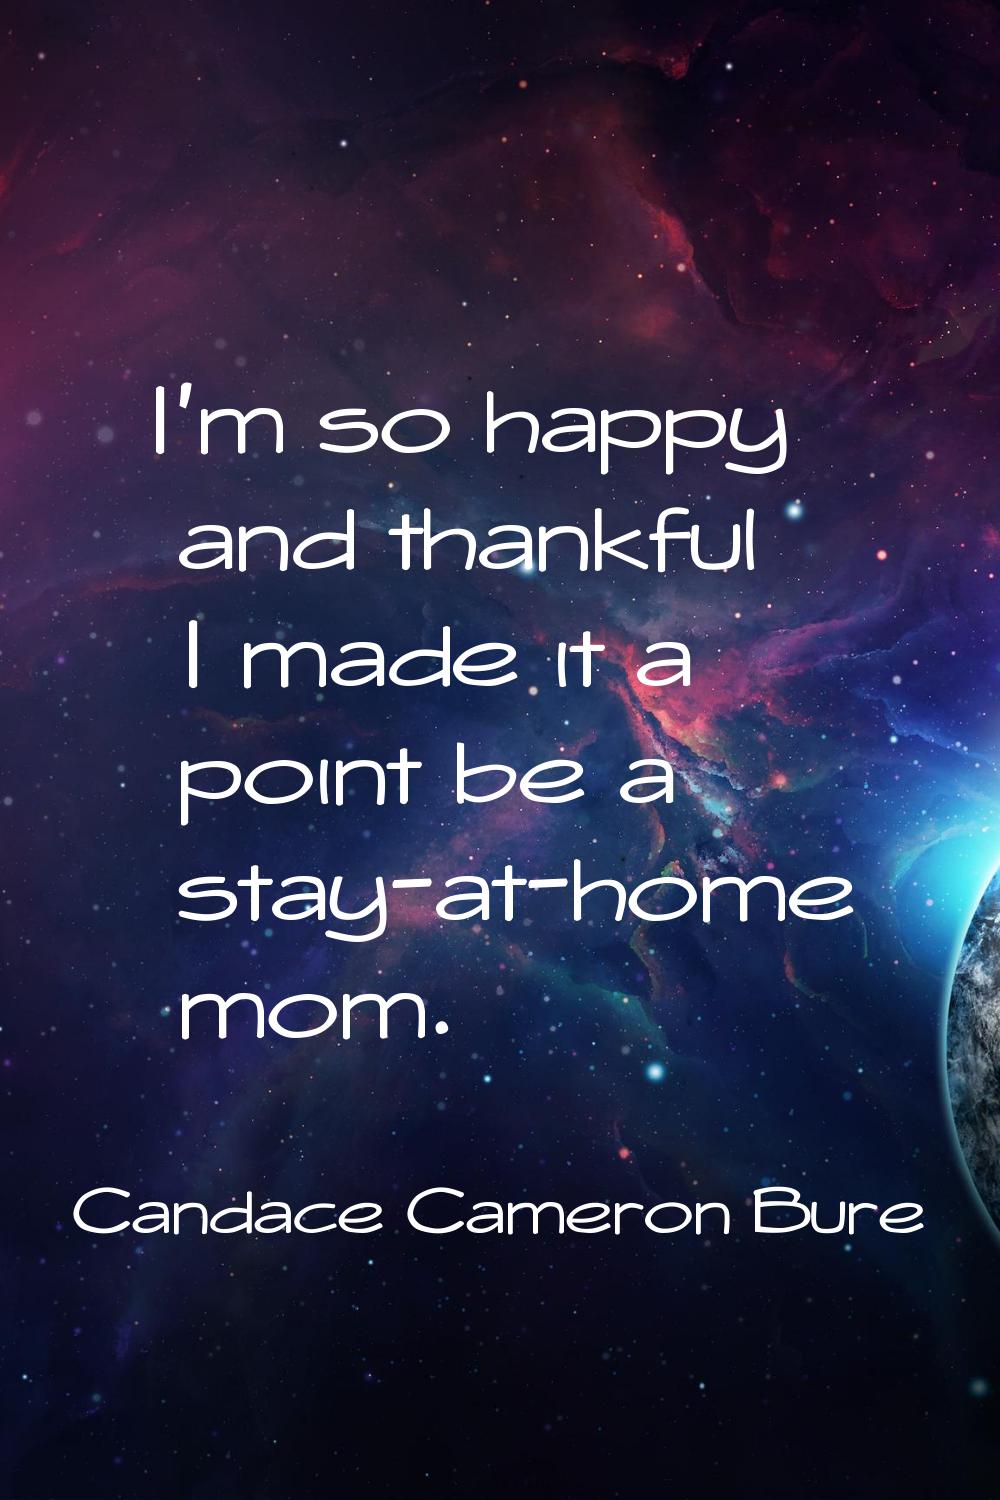 I'm so happy and thankful I made it a point be a stay-at-home mom.